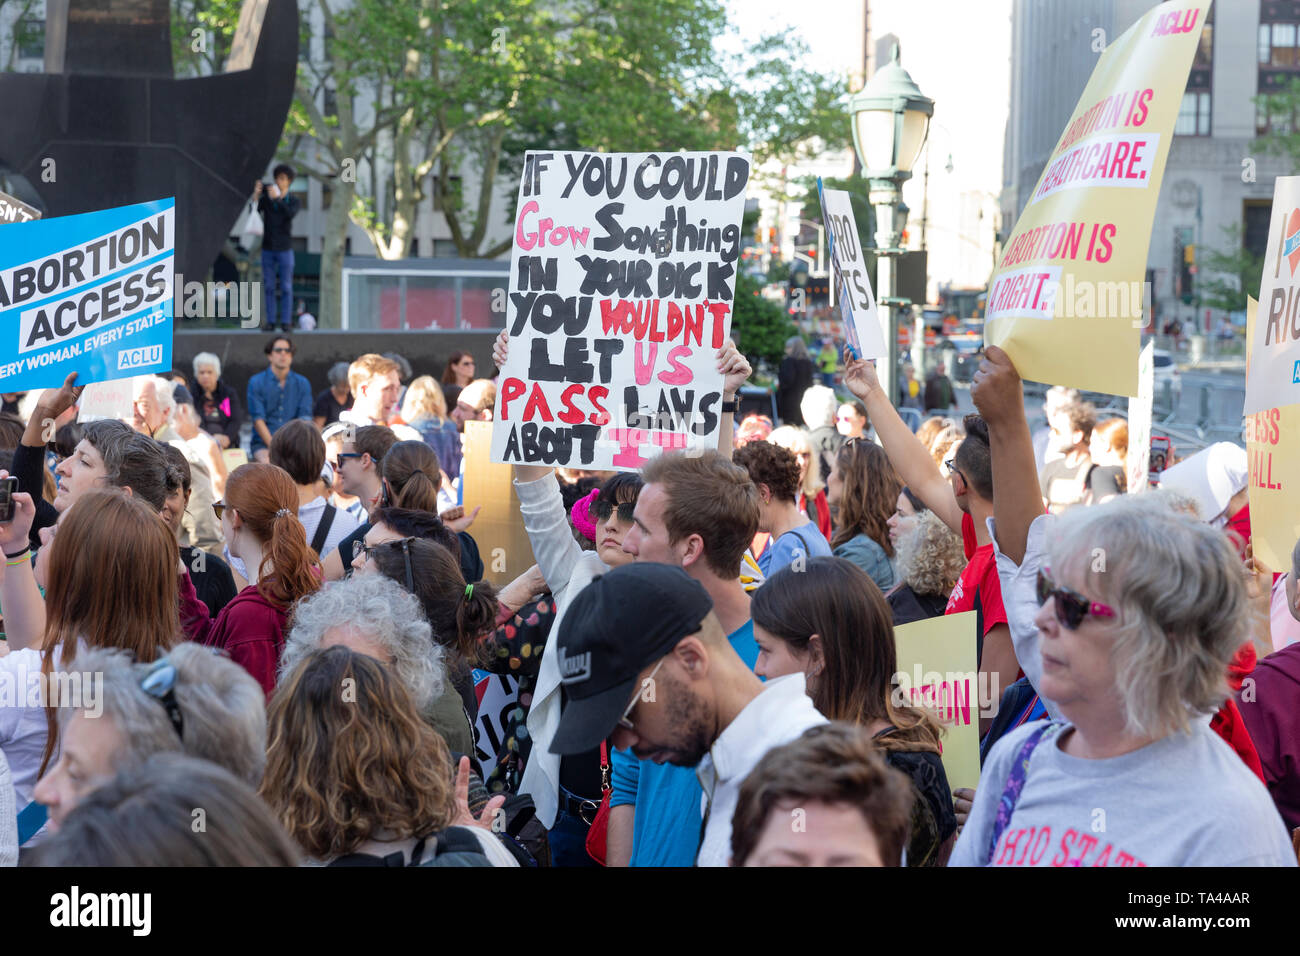 New York, NY - May 21, 2019: Hundreds of pro-choice demonstrators rally for women rights organized by Planned Parenthood on Foley Square Stock Photo